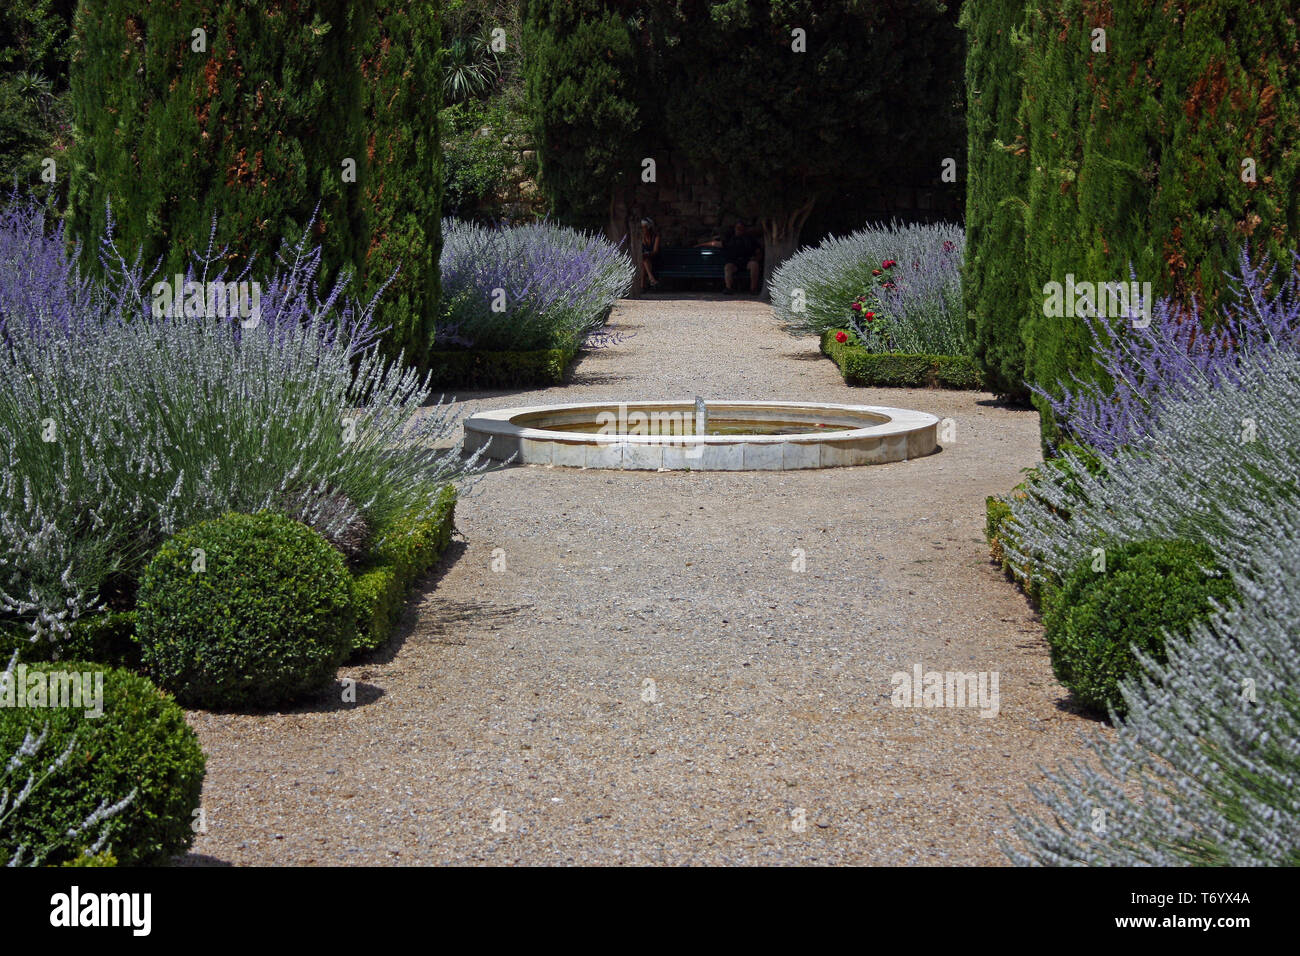 Monastery Garden Fontfroide, Narbonne, France Stock Photo